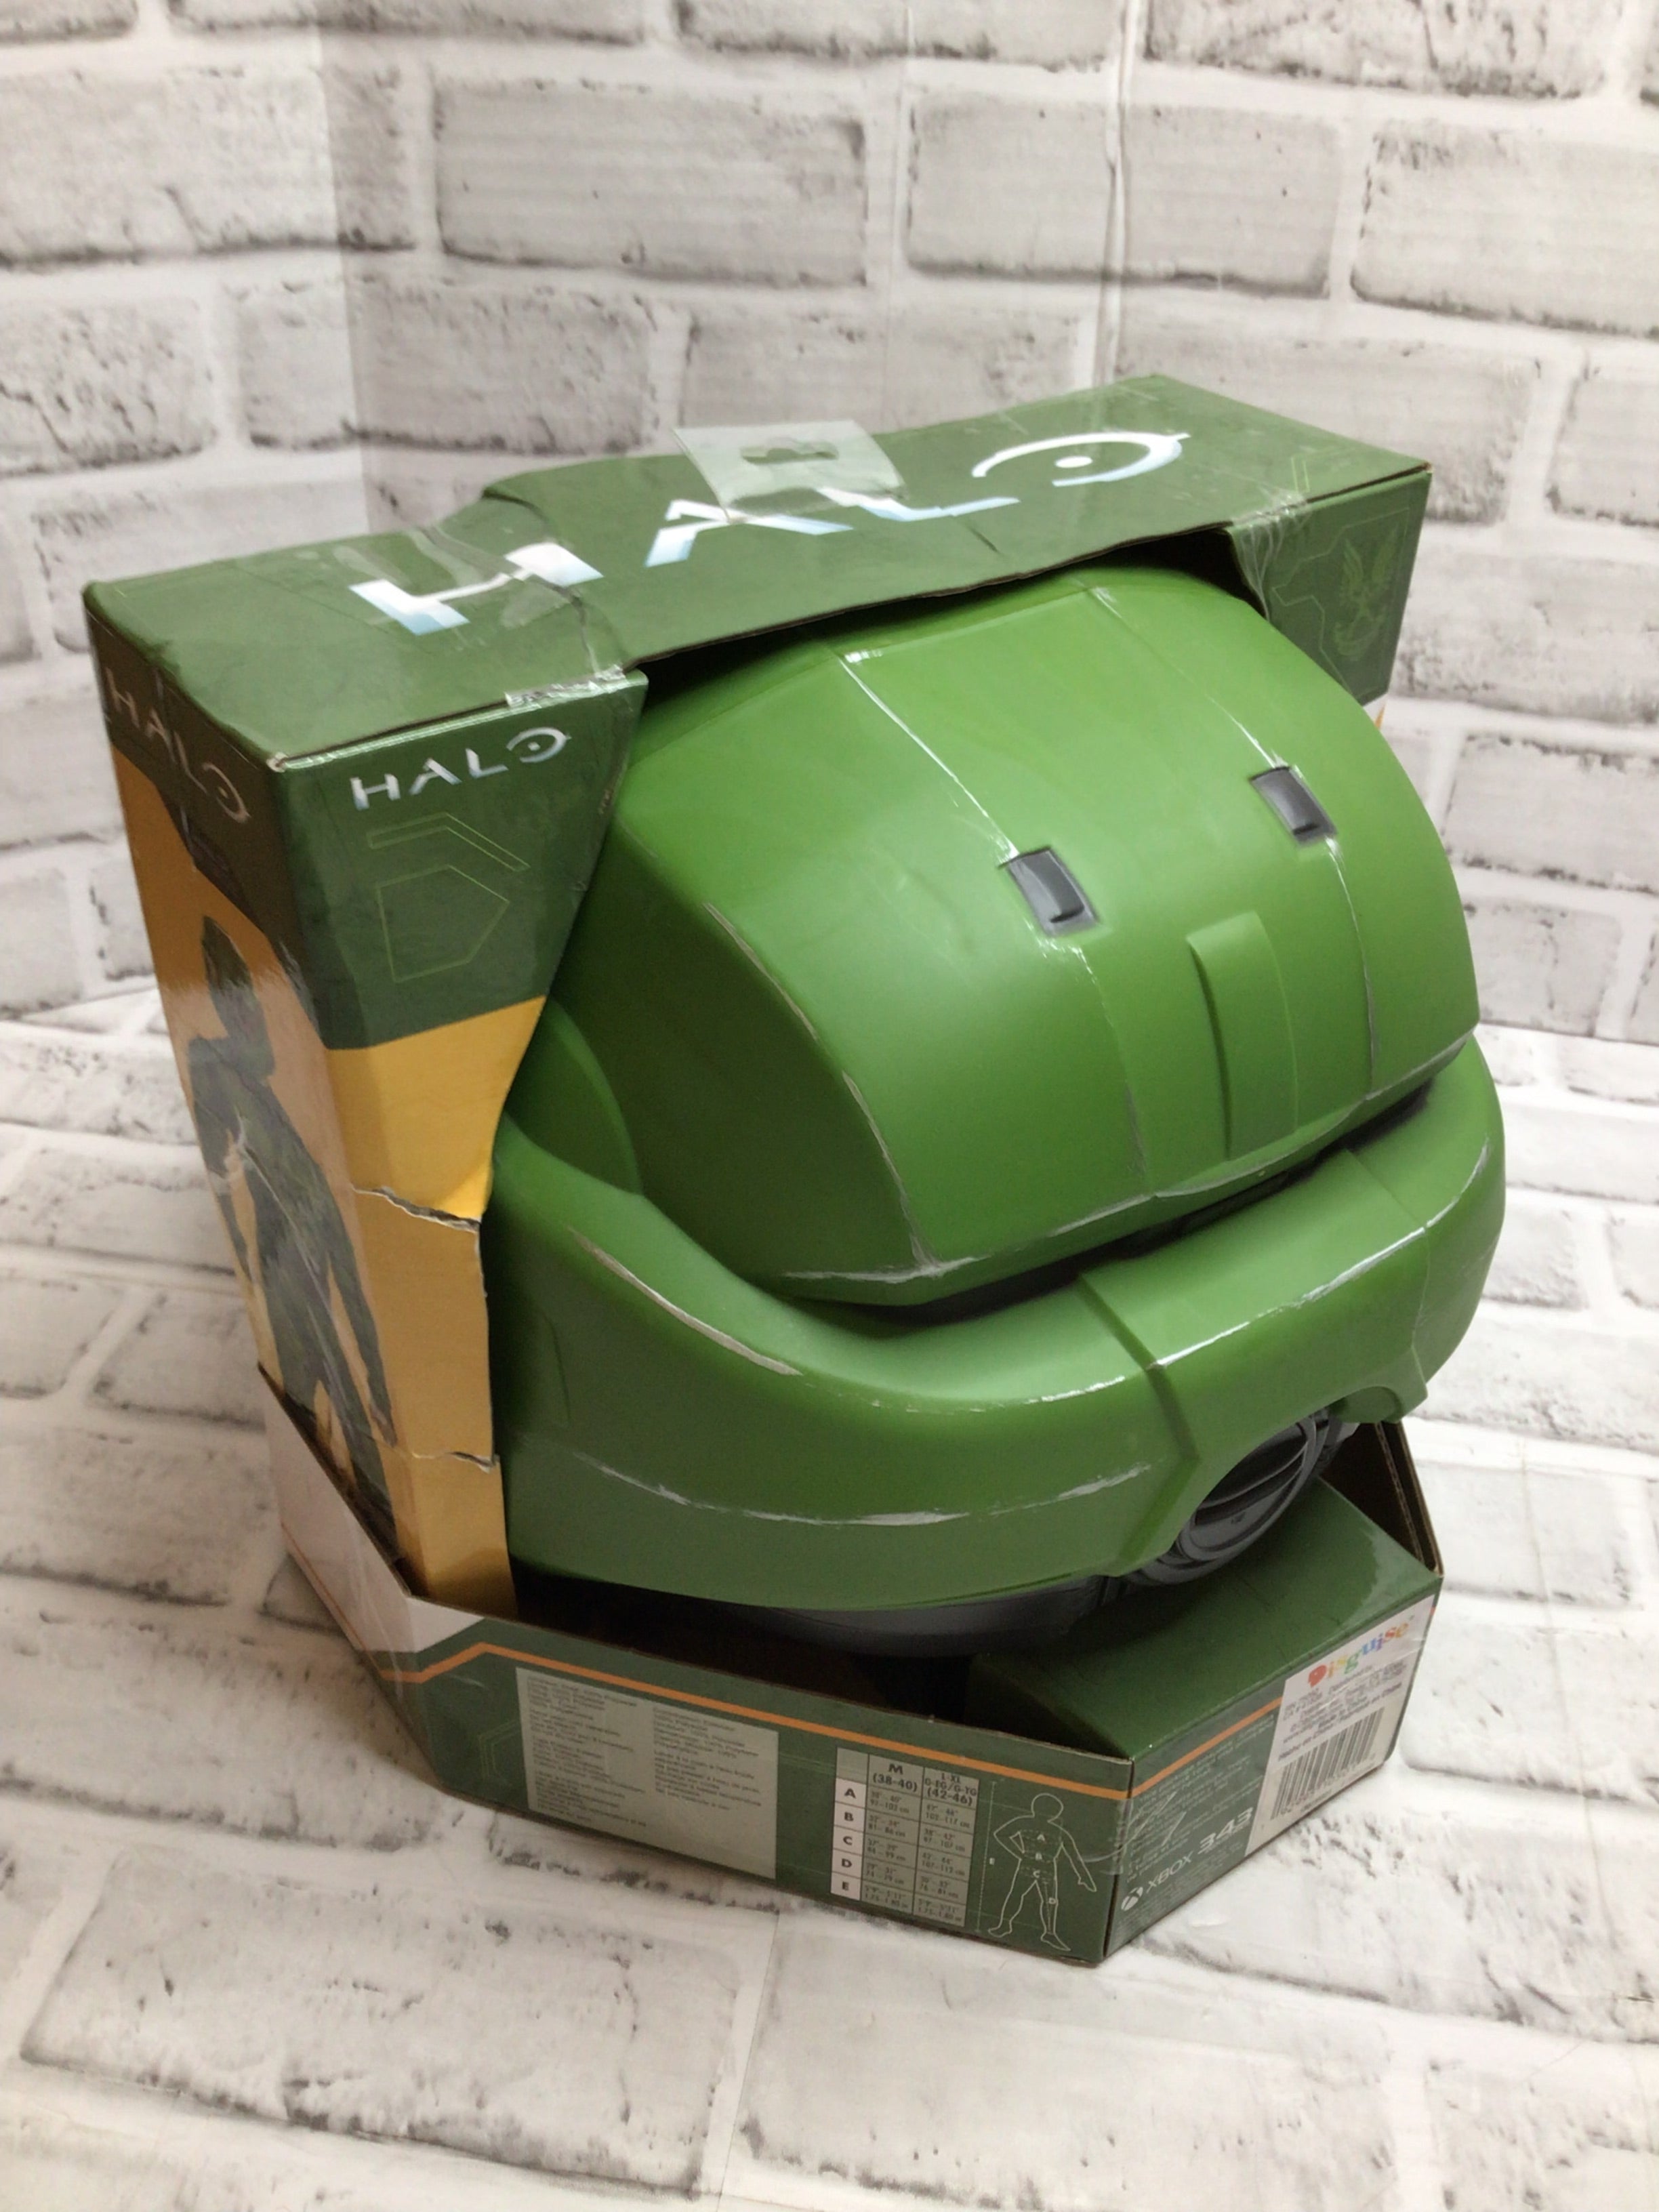 Halo Infinite Master Chief Adult Costume Size L-XL (42-46) (8088193794286)